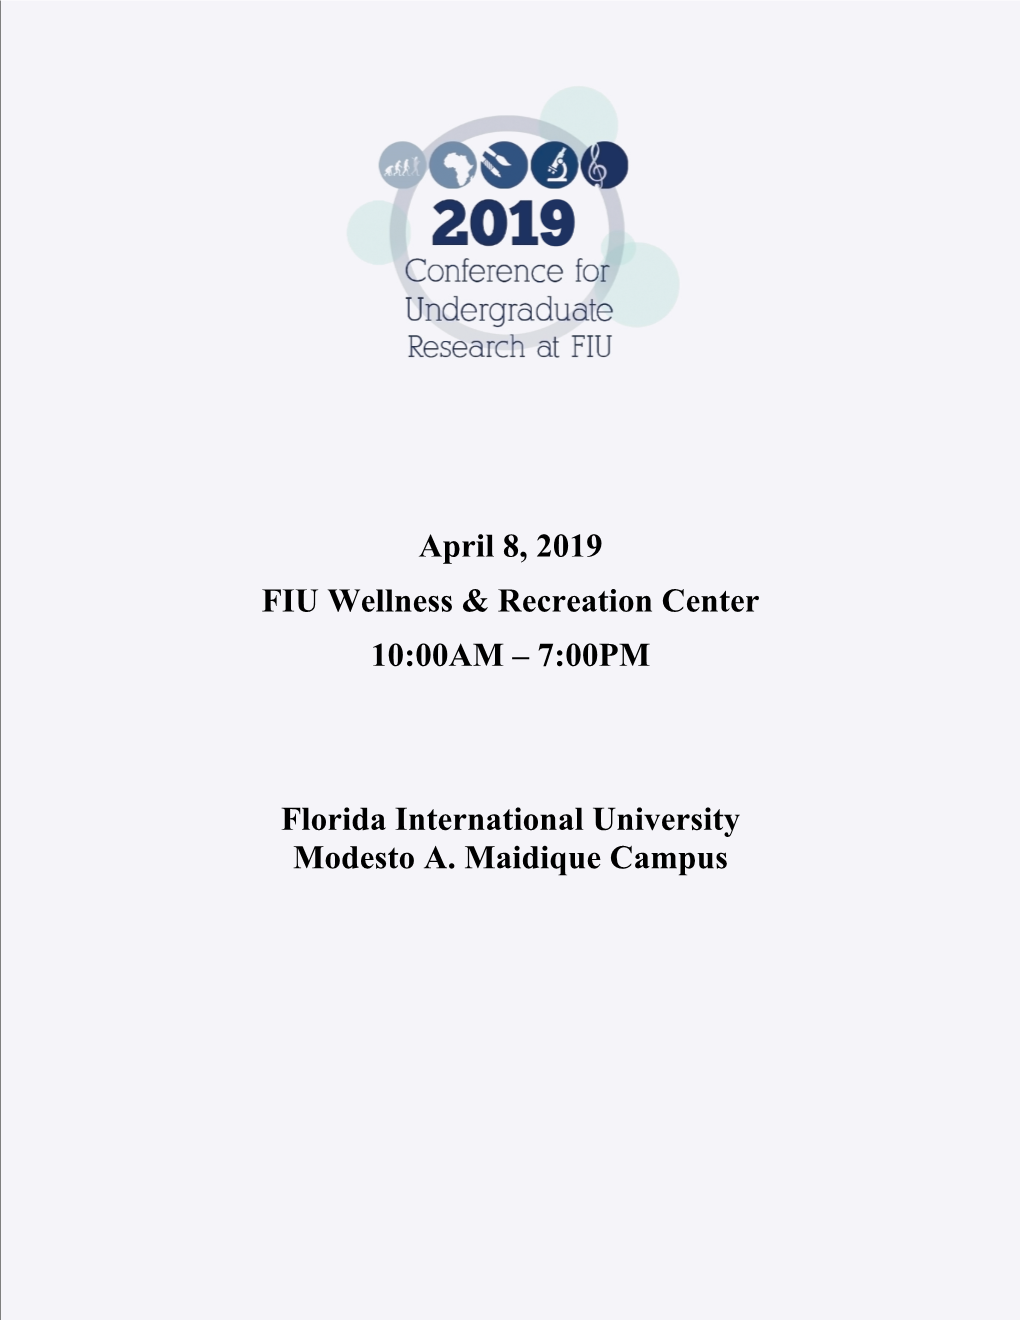 Conference for Undergraduate Research at FIU 2019 Full Program